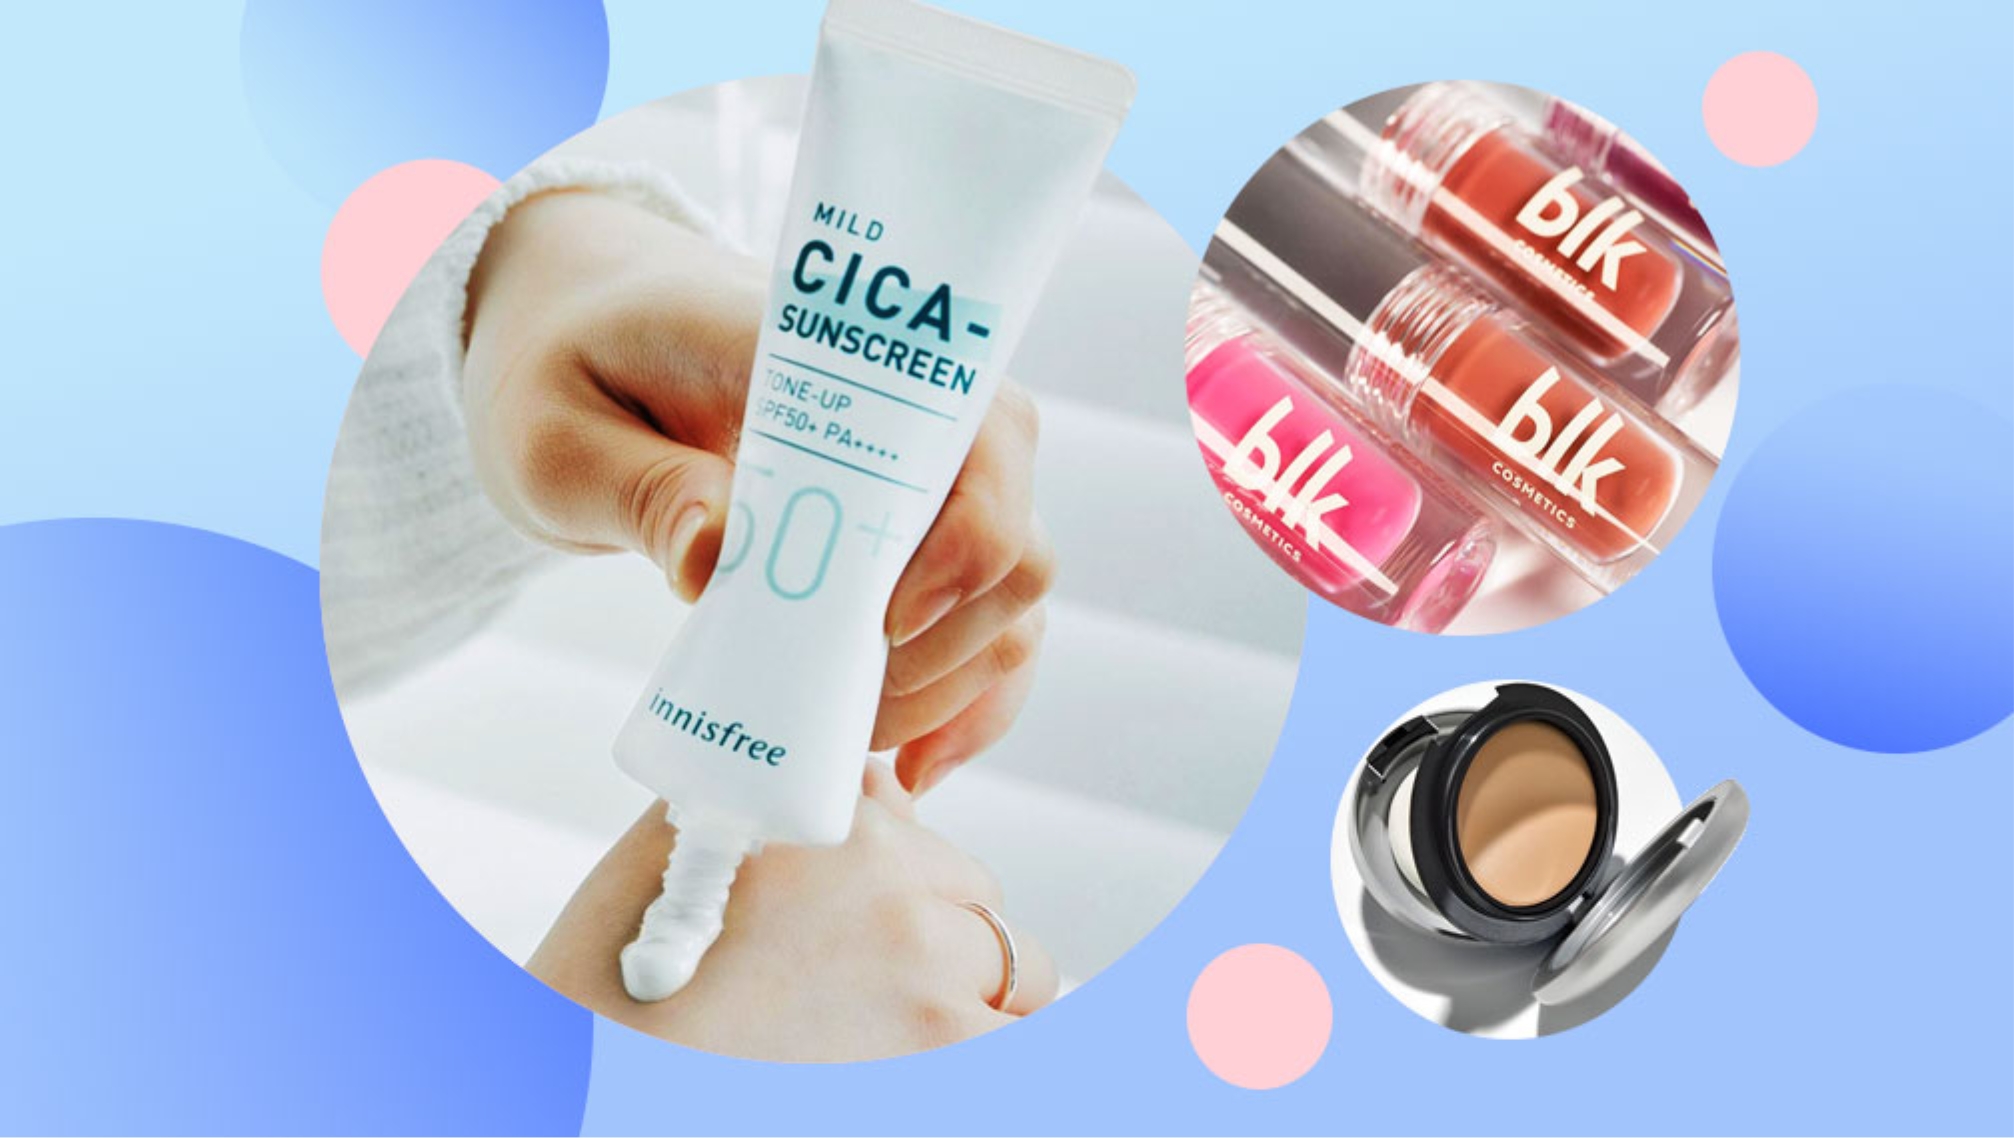 On Our Radar: 5 Beauty Products That Bring Out The Super You